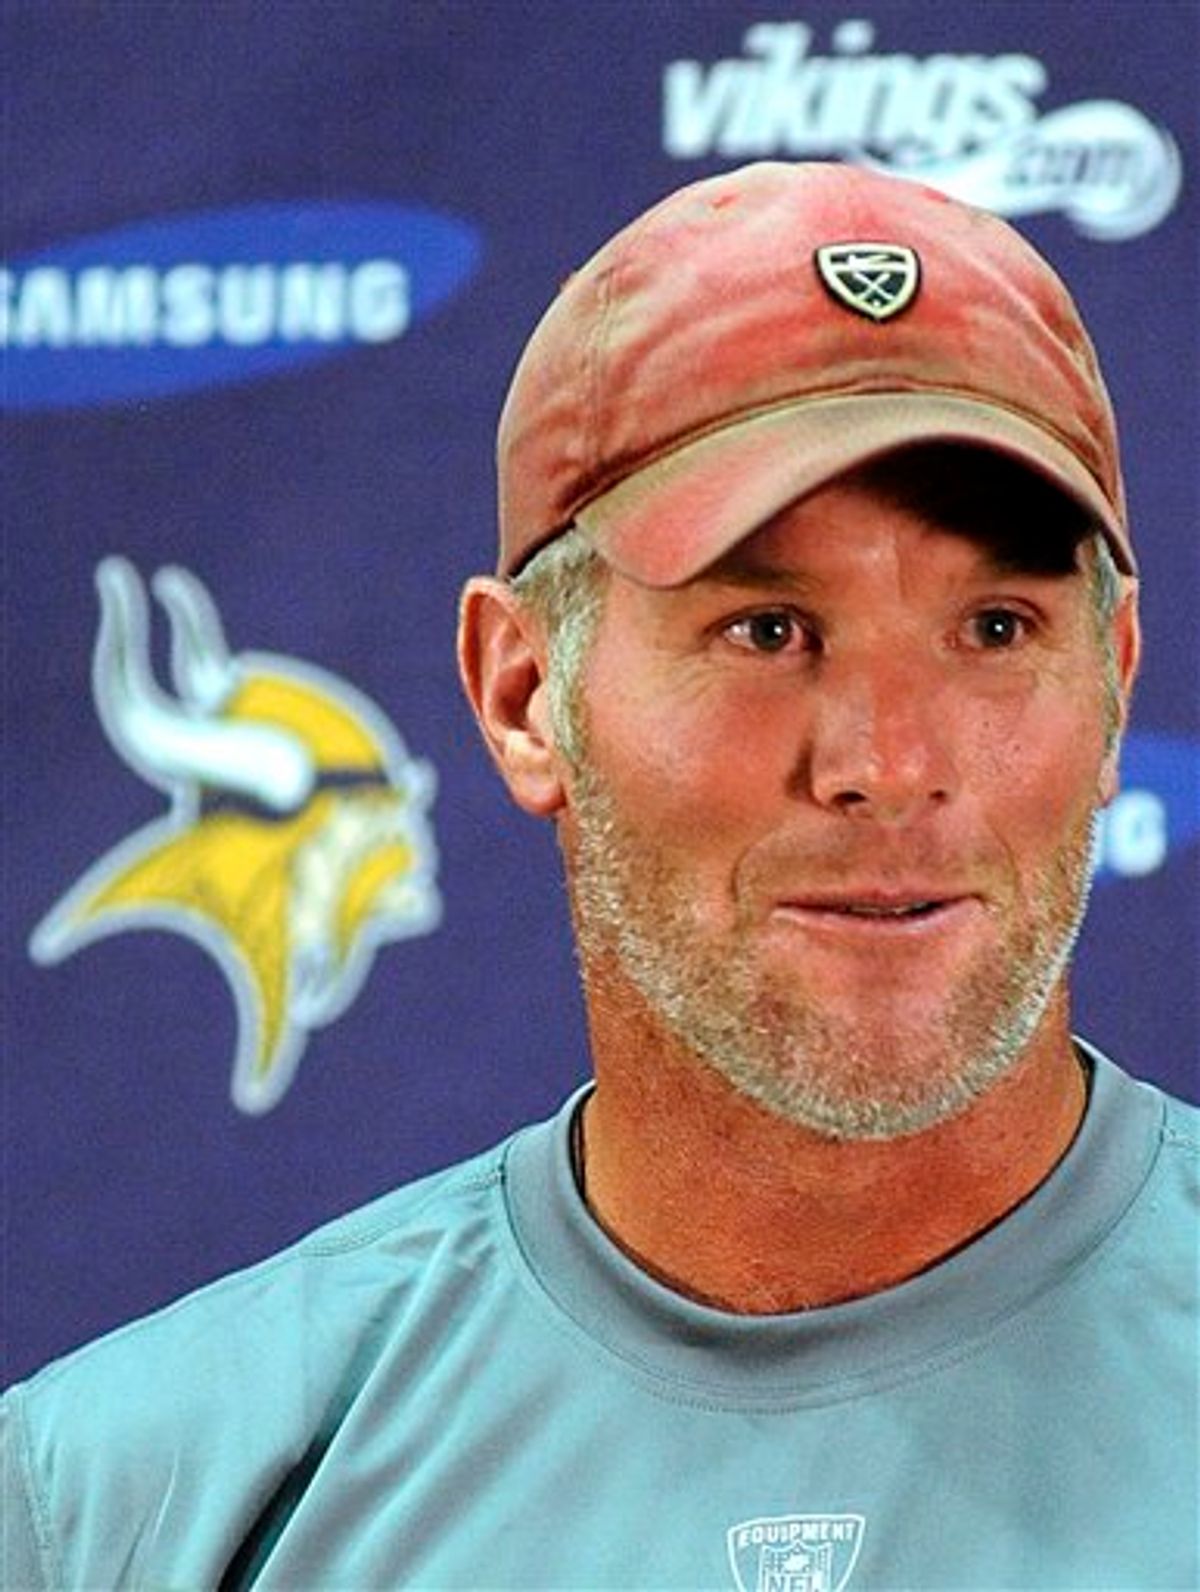 FILE - This Aug. 18, 2009, file photo shows Minnesota Vikings quarterback Brett Favre speaking during a news conference at the NFL football team's training facility, in Eden Prairie, Minn.  A person with knowledge of the situation tells The Associated Press that Brett Favre has informed the Vikings he will not return to Minnesota for a second season. The person spoke on condition of anonymity Tuesday, Aug. 3, 2010,  because the team had not made an official announcement. (AP Photo/Hannah Foslien, FIle) (AP)